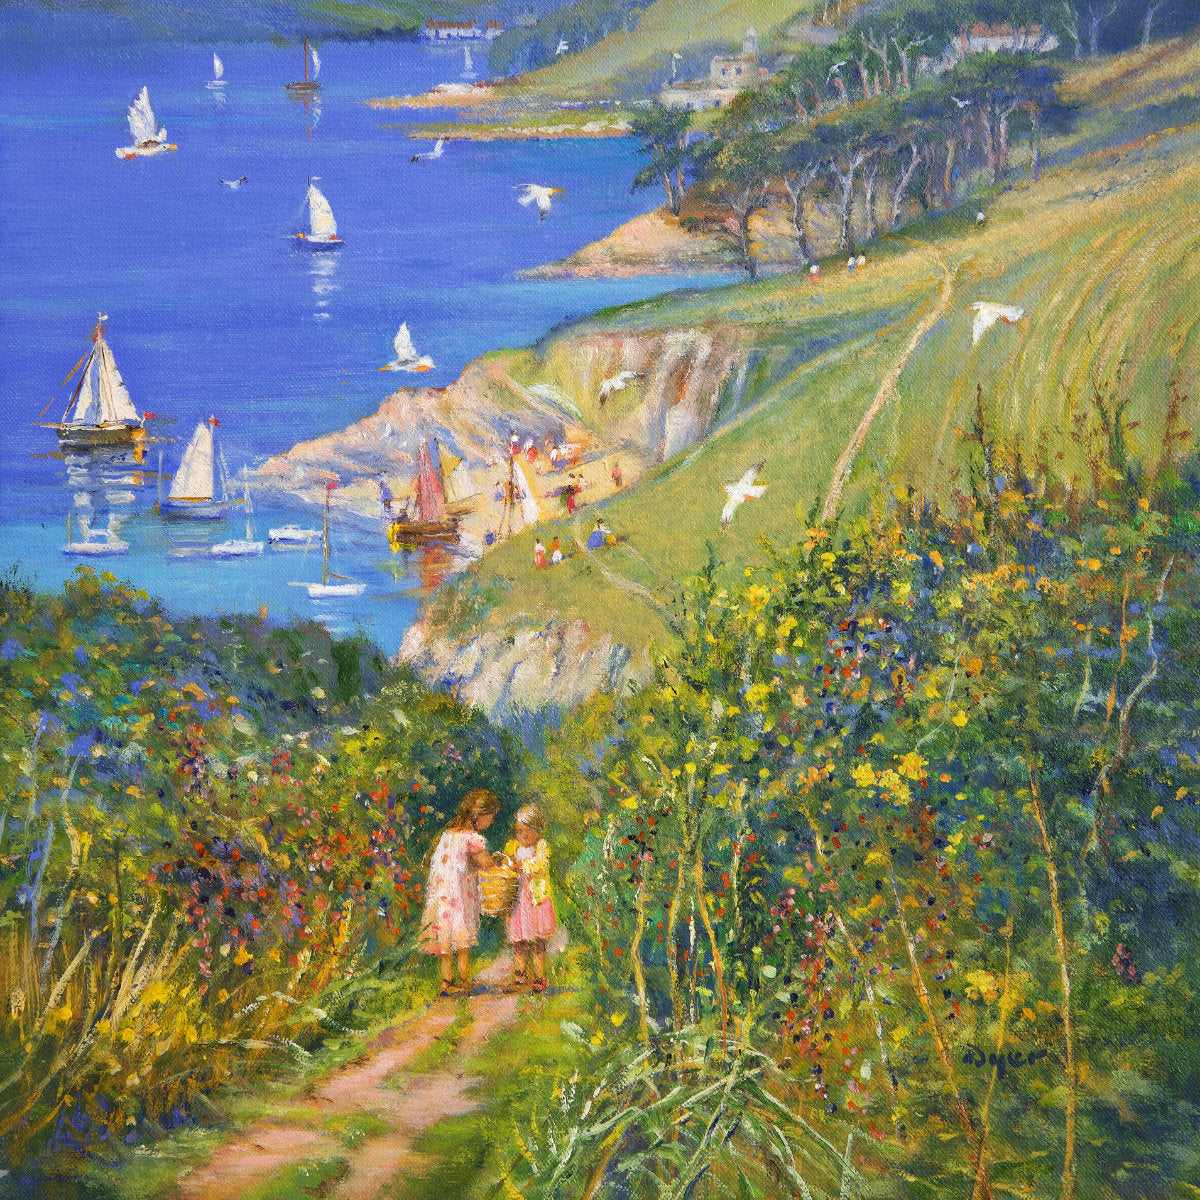 'Blackberry Picking. St Anthony Head', 20 x 24 inches original art oil on canvas. Paintings of Cornwall by Cornish Artist Ted Dyer from our Cornwall Art Gallery